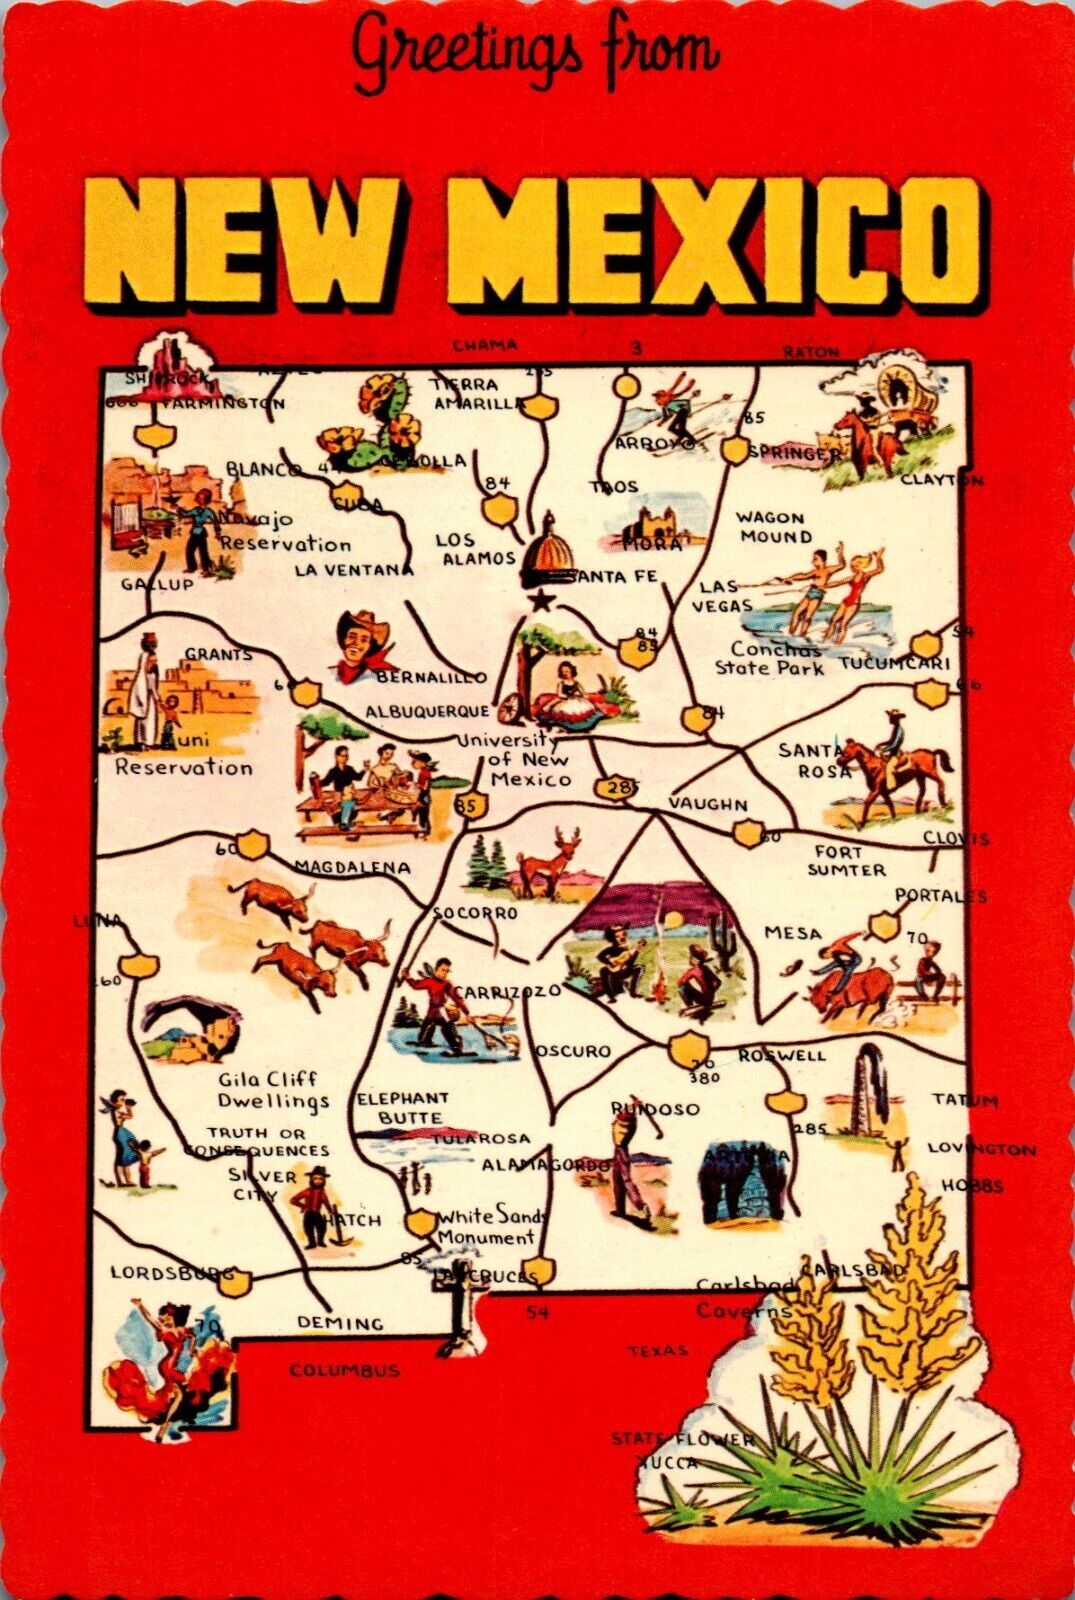 Greetings from New Mexico NM Postcard